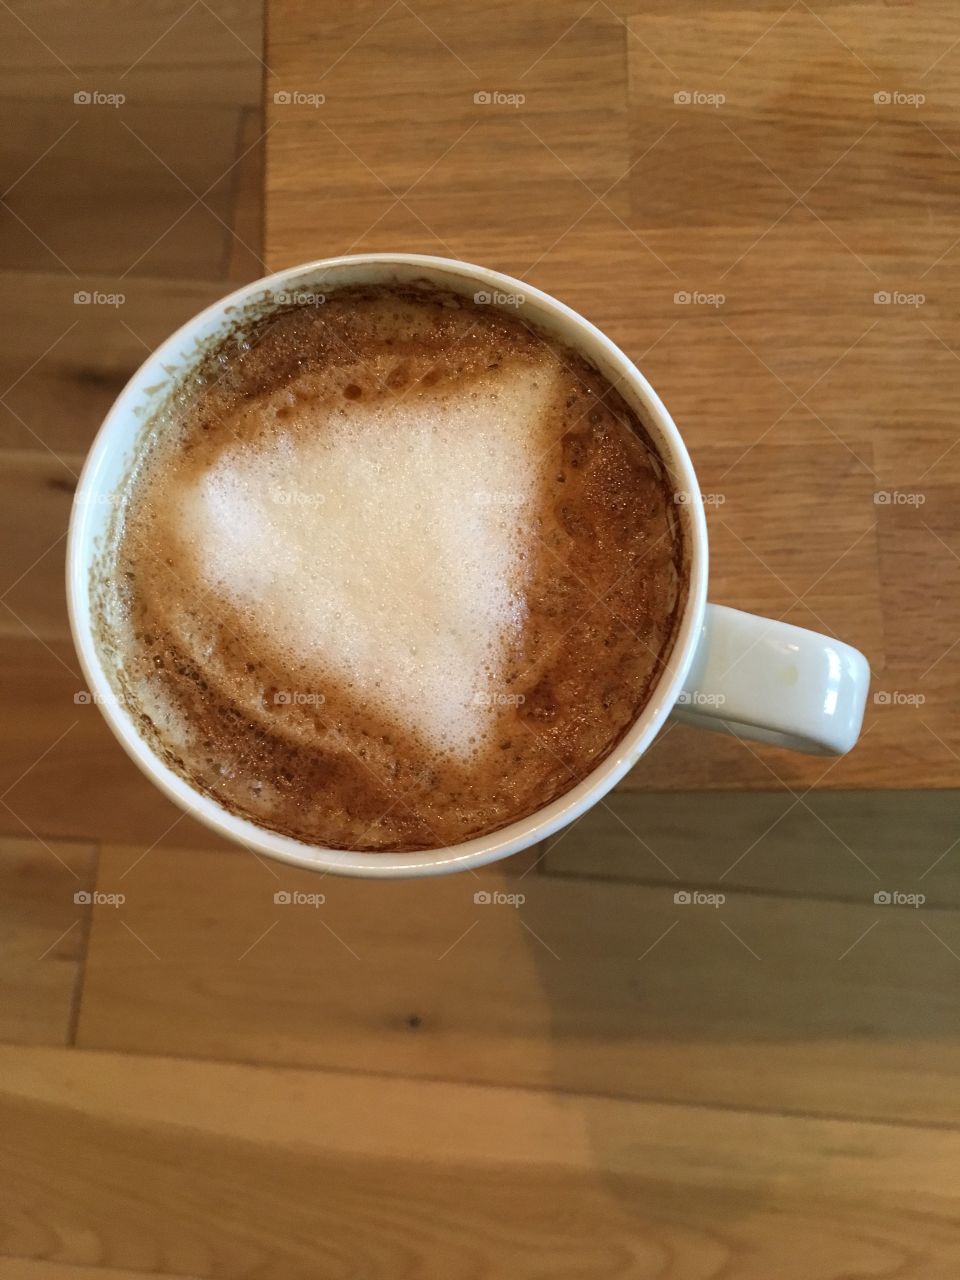 Triangle formed on my coffee 